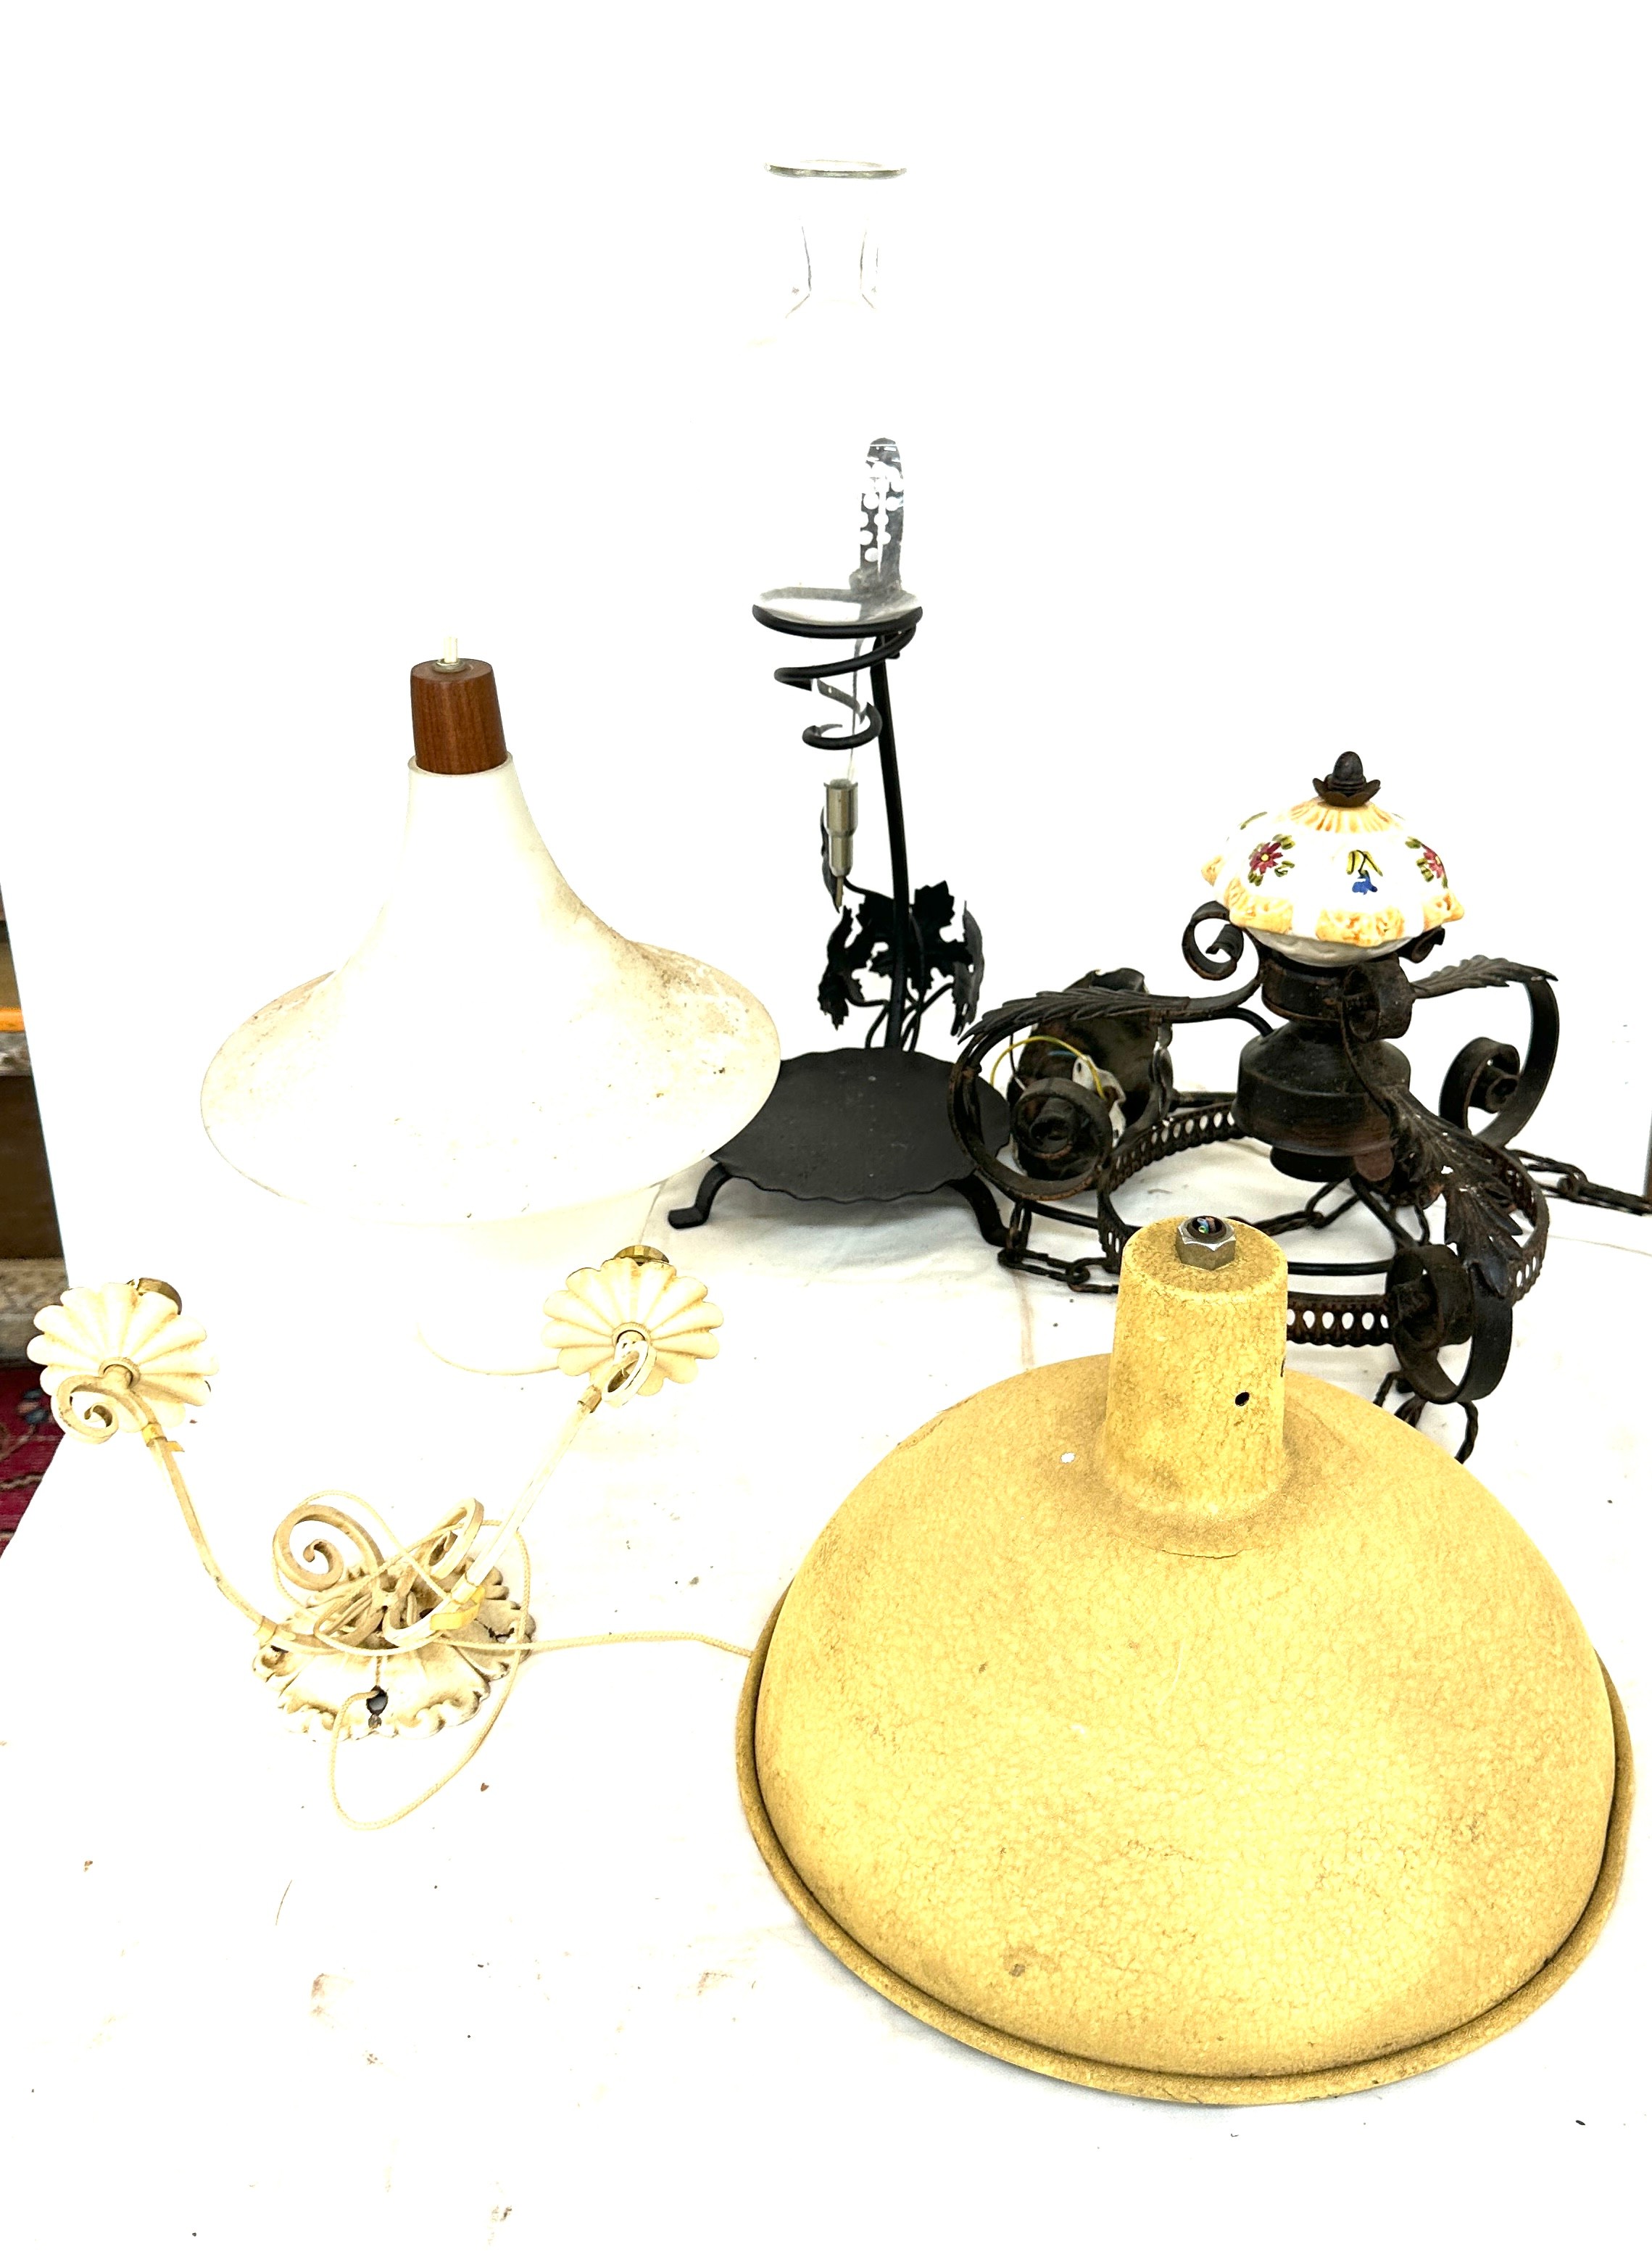 3 Vintage light fittings and a glass shade stand